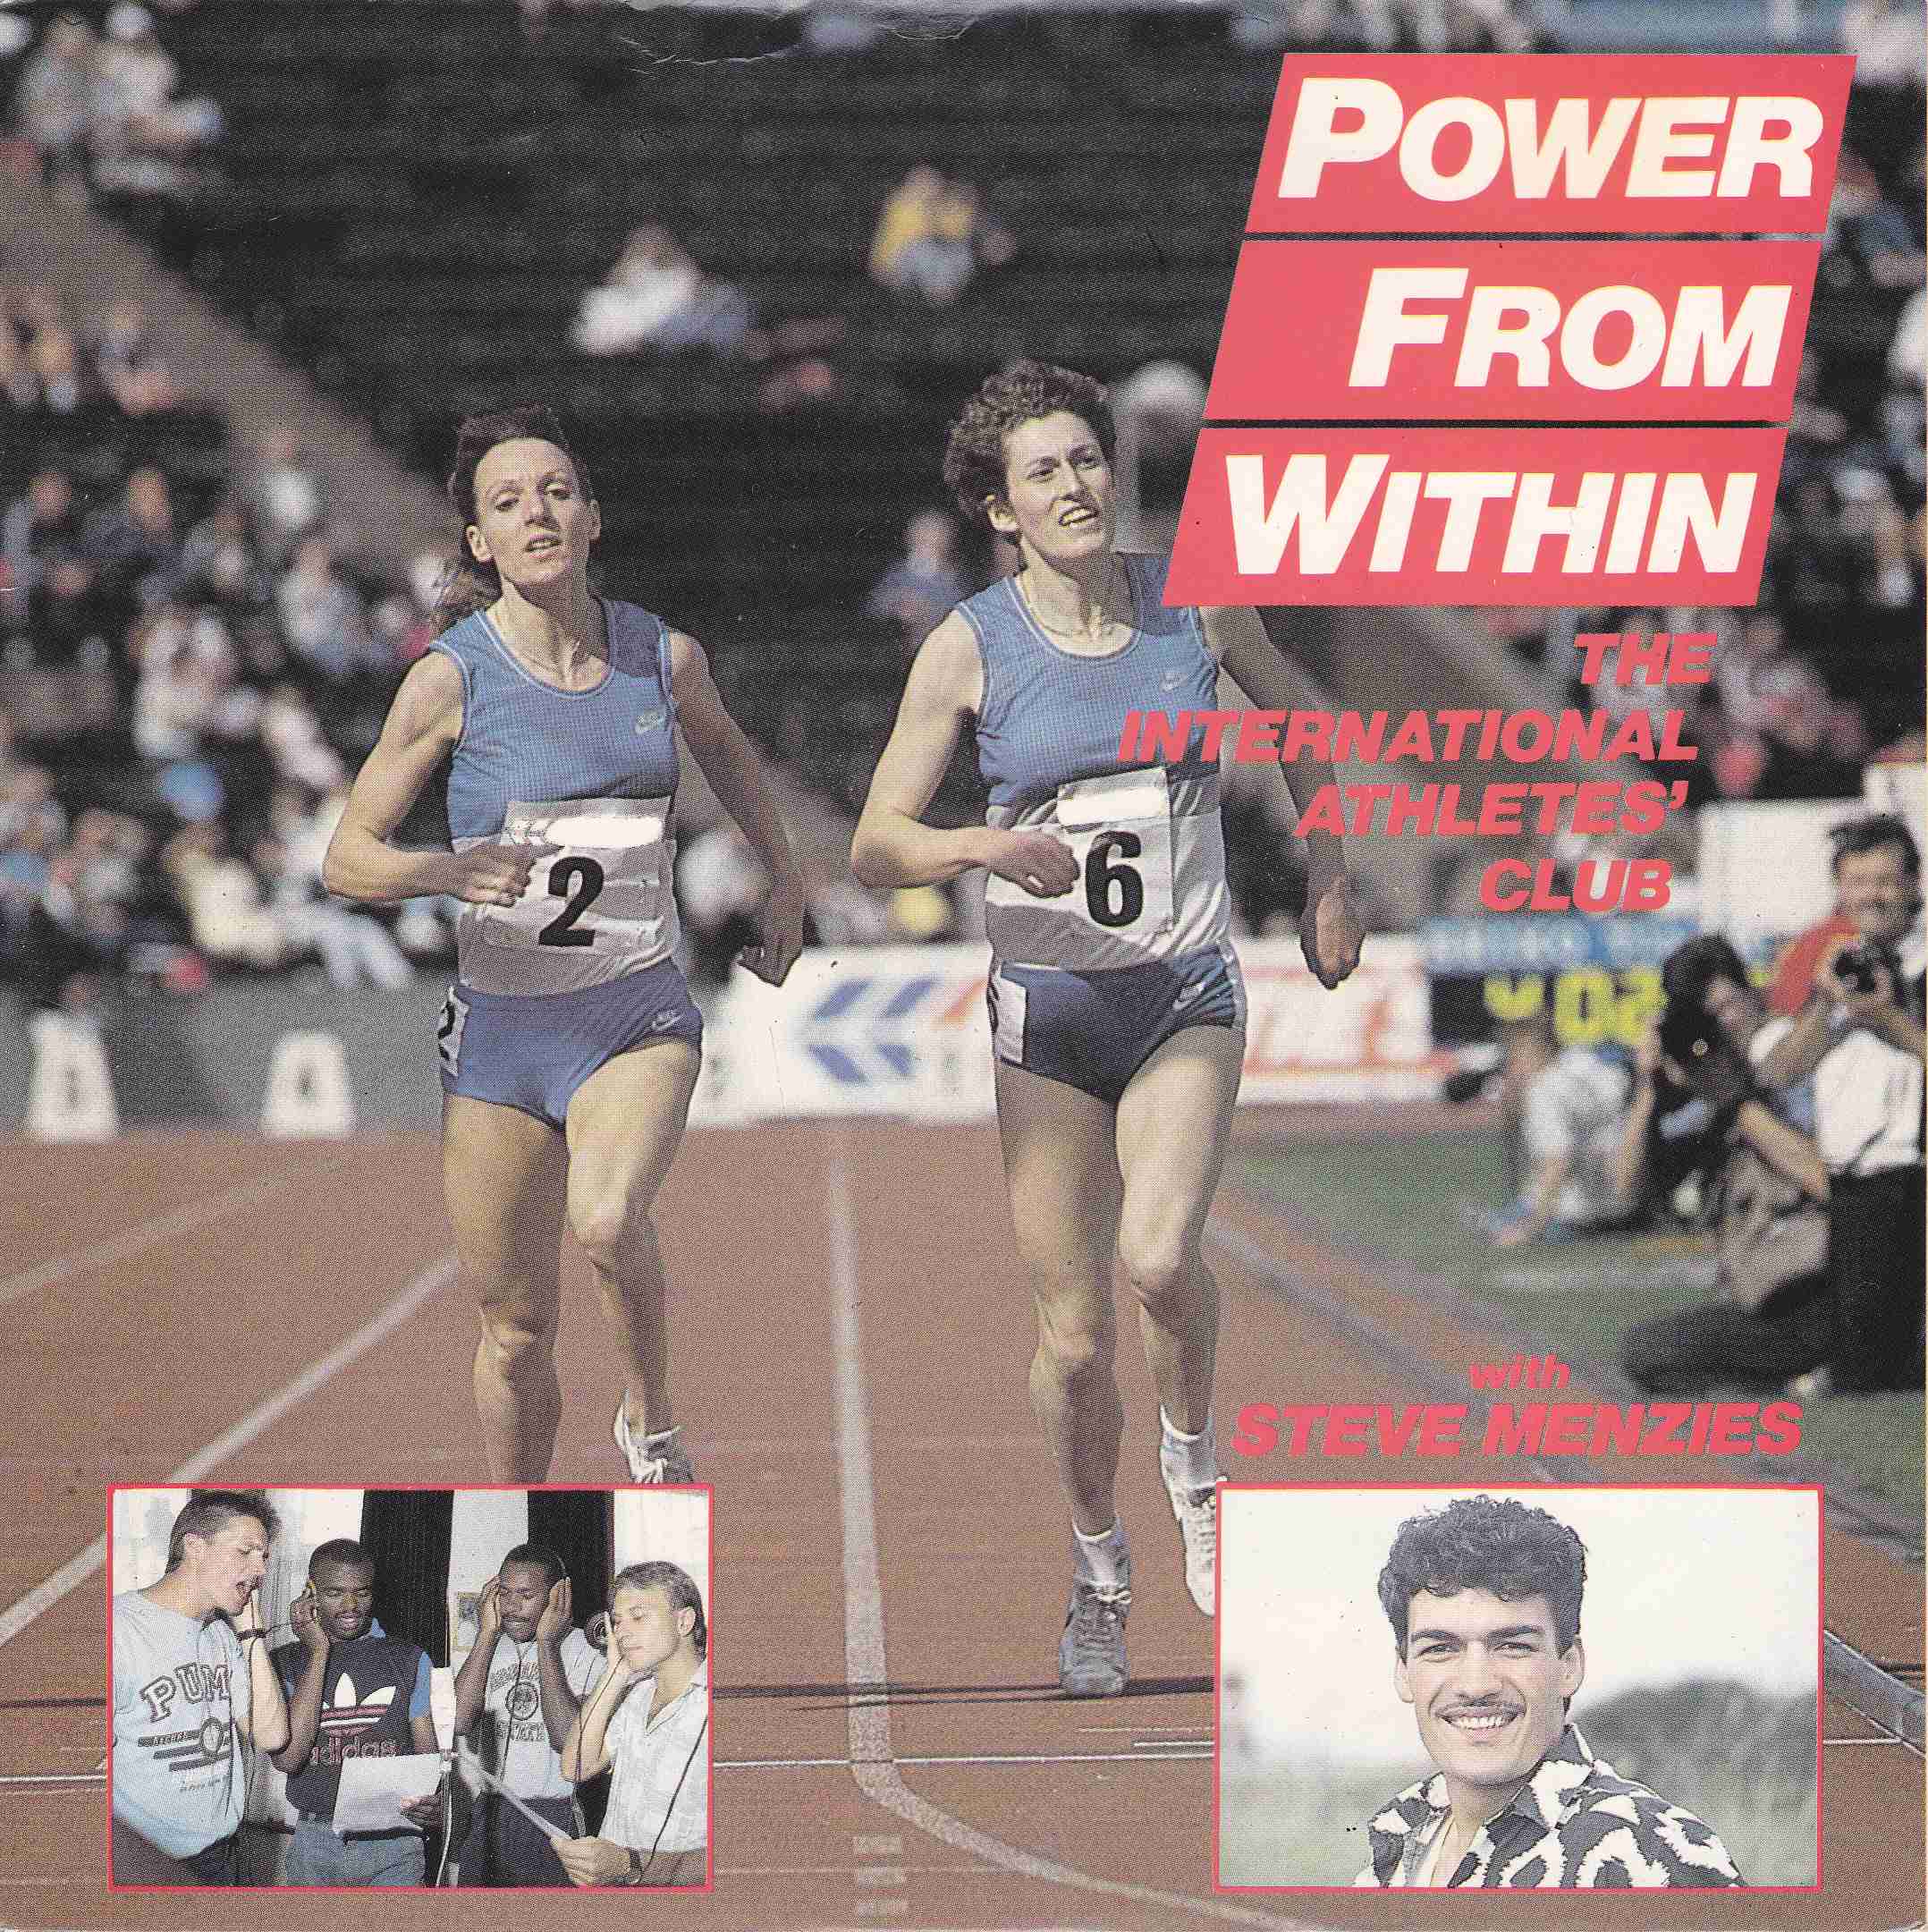 Picture of RESL 198 Power from within by artist The International Athletes' Club with Steve Menzies from the BBC singles - Records and Tapes library